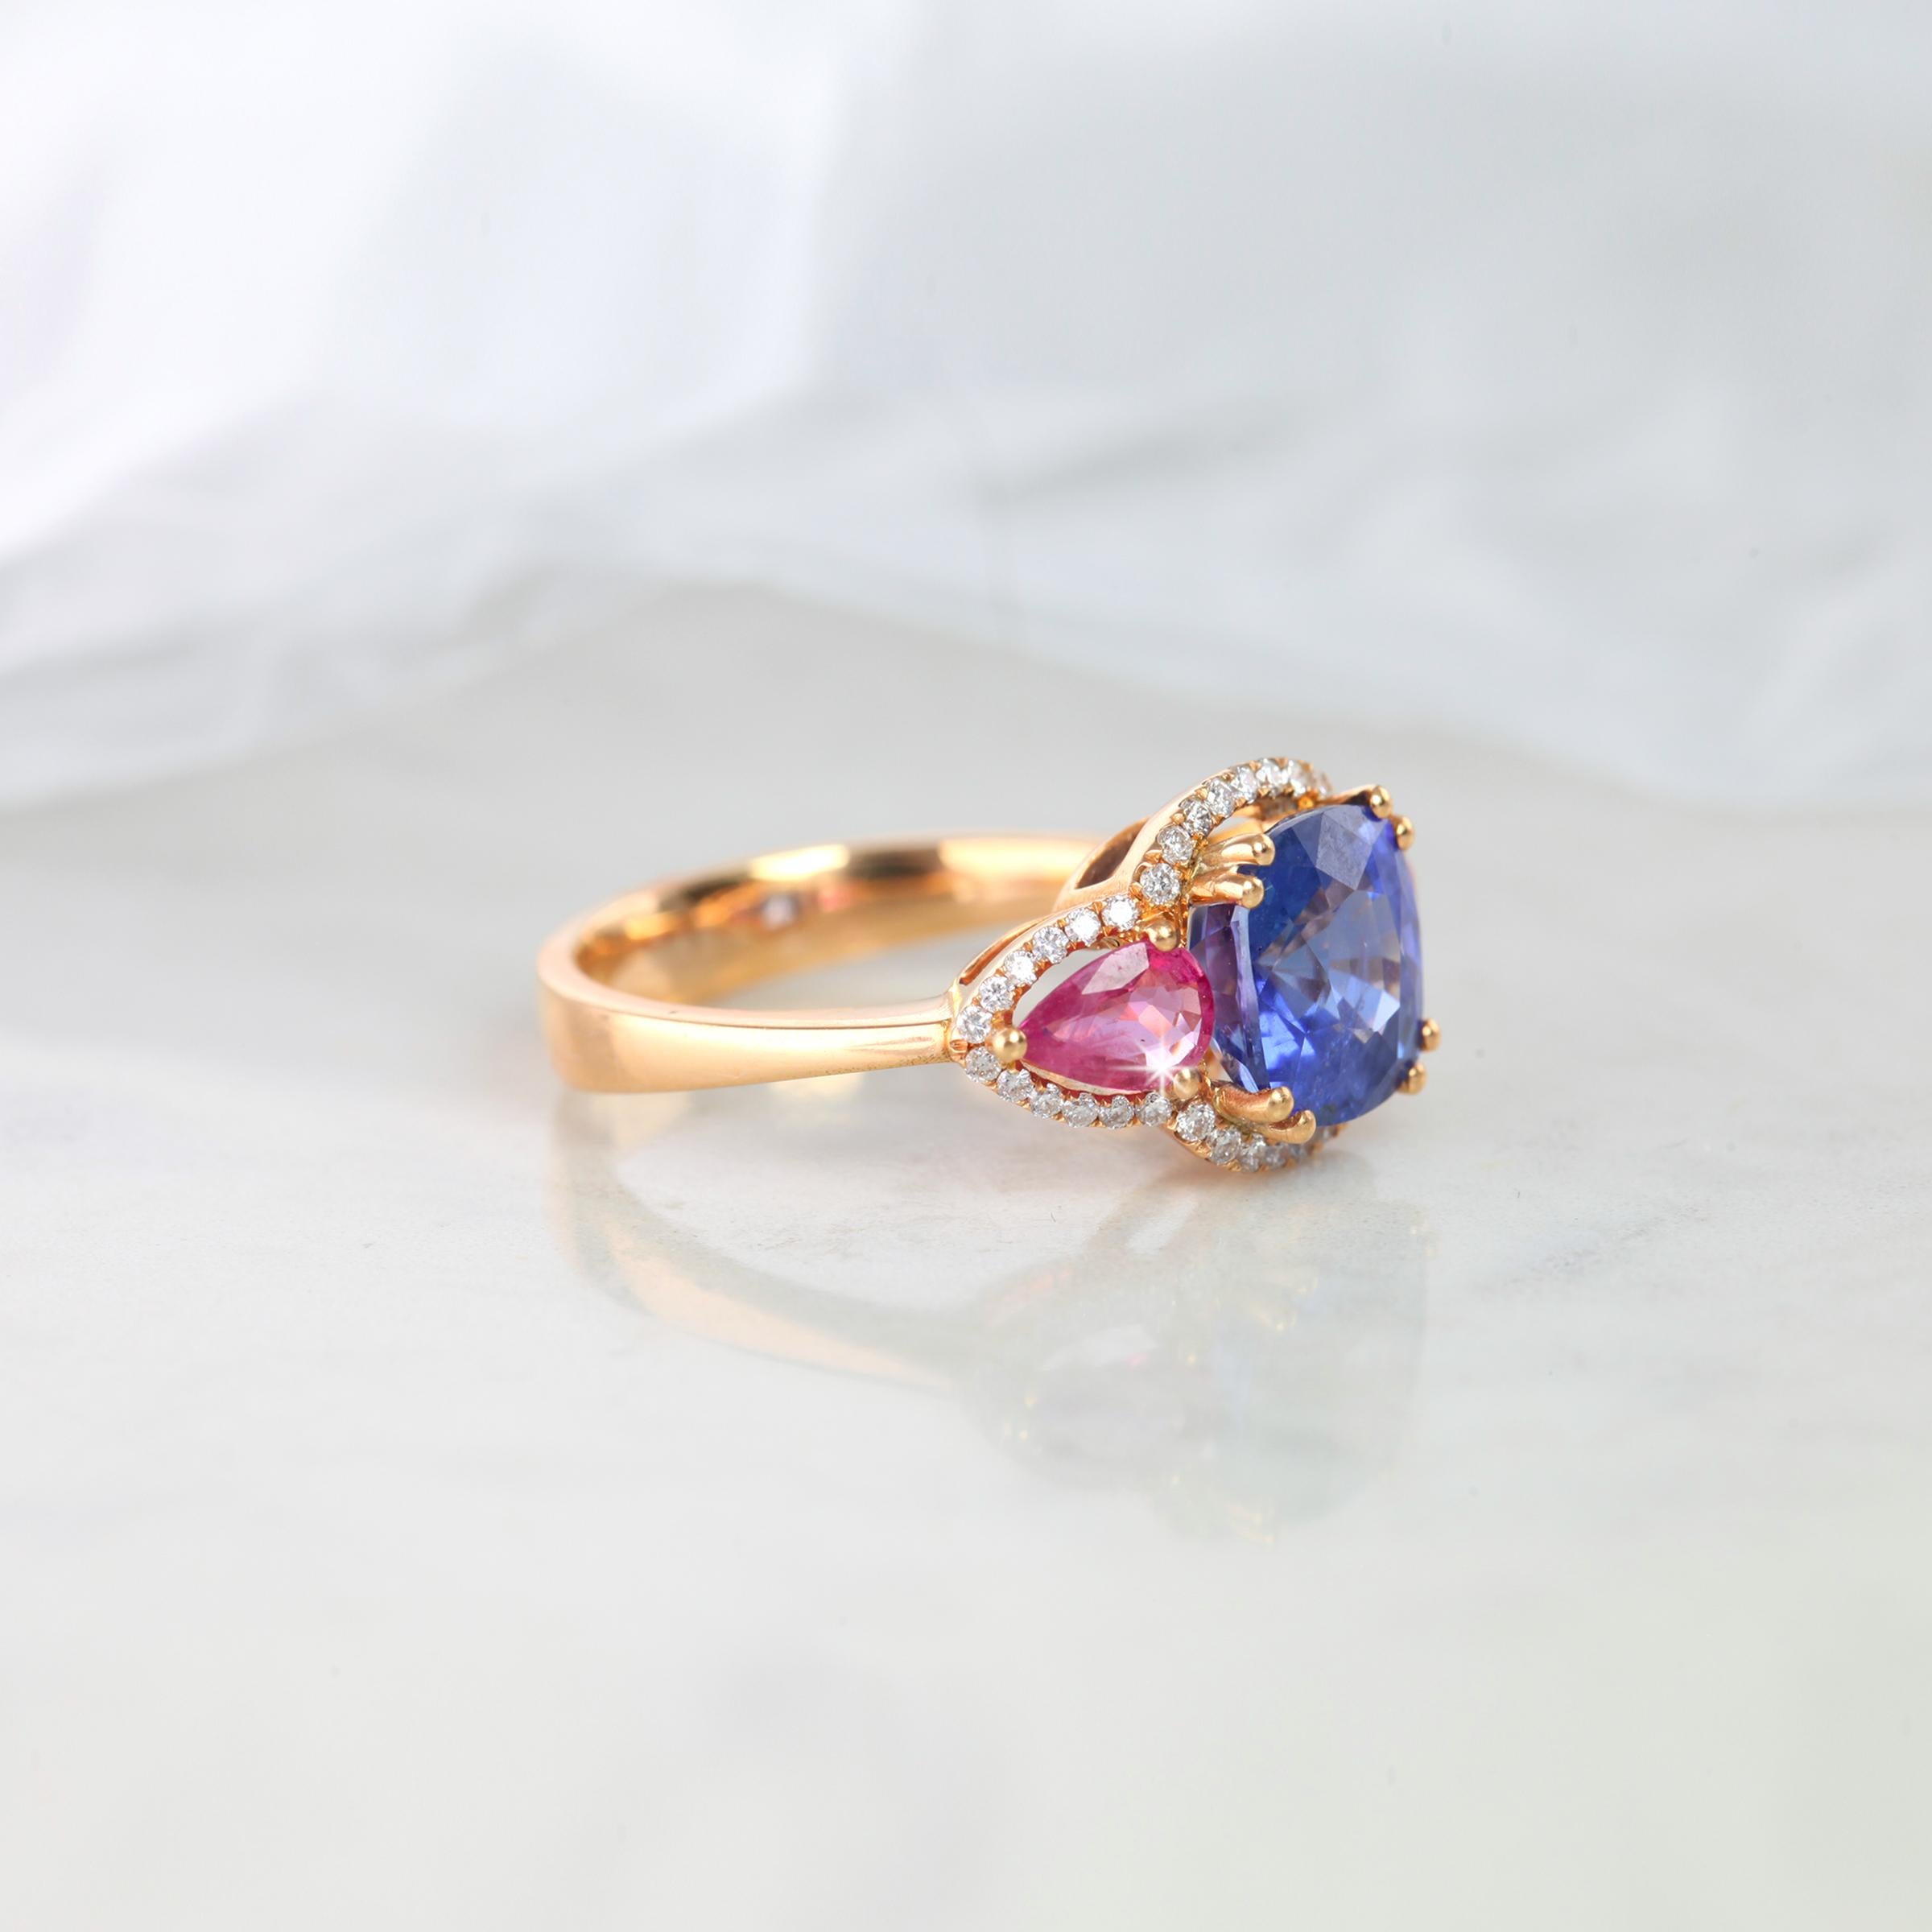 Cocktail Ring,Ceylon Sapphire With Side Pave Diamond And Pink Pear Shape Sapphire Multicolor Ring created by hands with great honour.

I used brillant pink pear shape sapphire to reveal ceylon sapphire stone. I completed these in 14K solid excelent